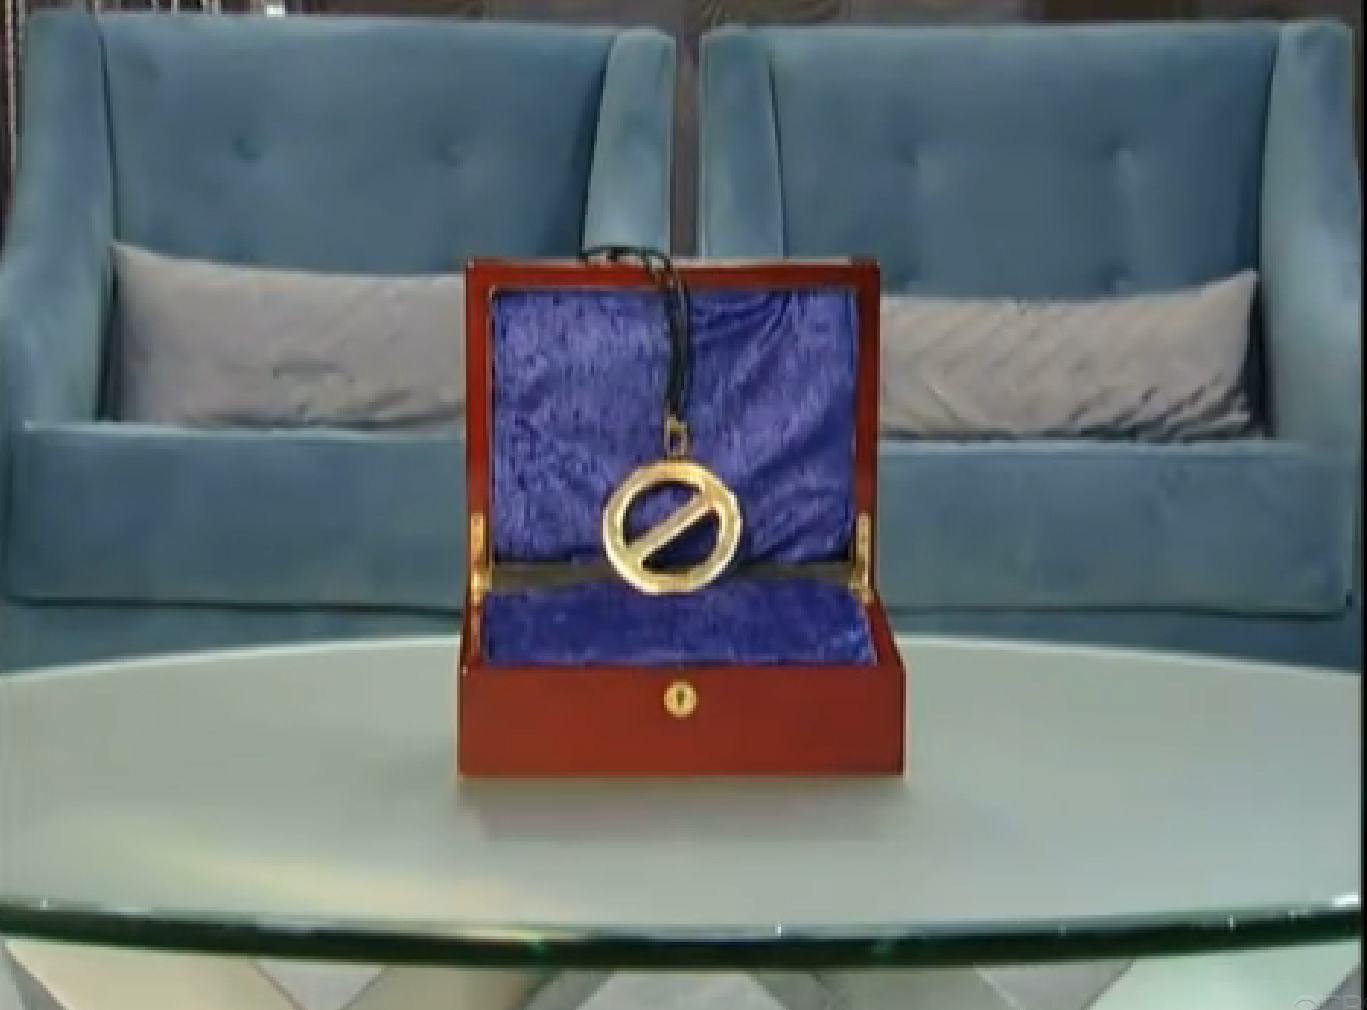 Power of Veto - Big Brother Wiki